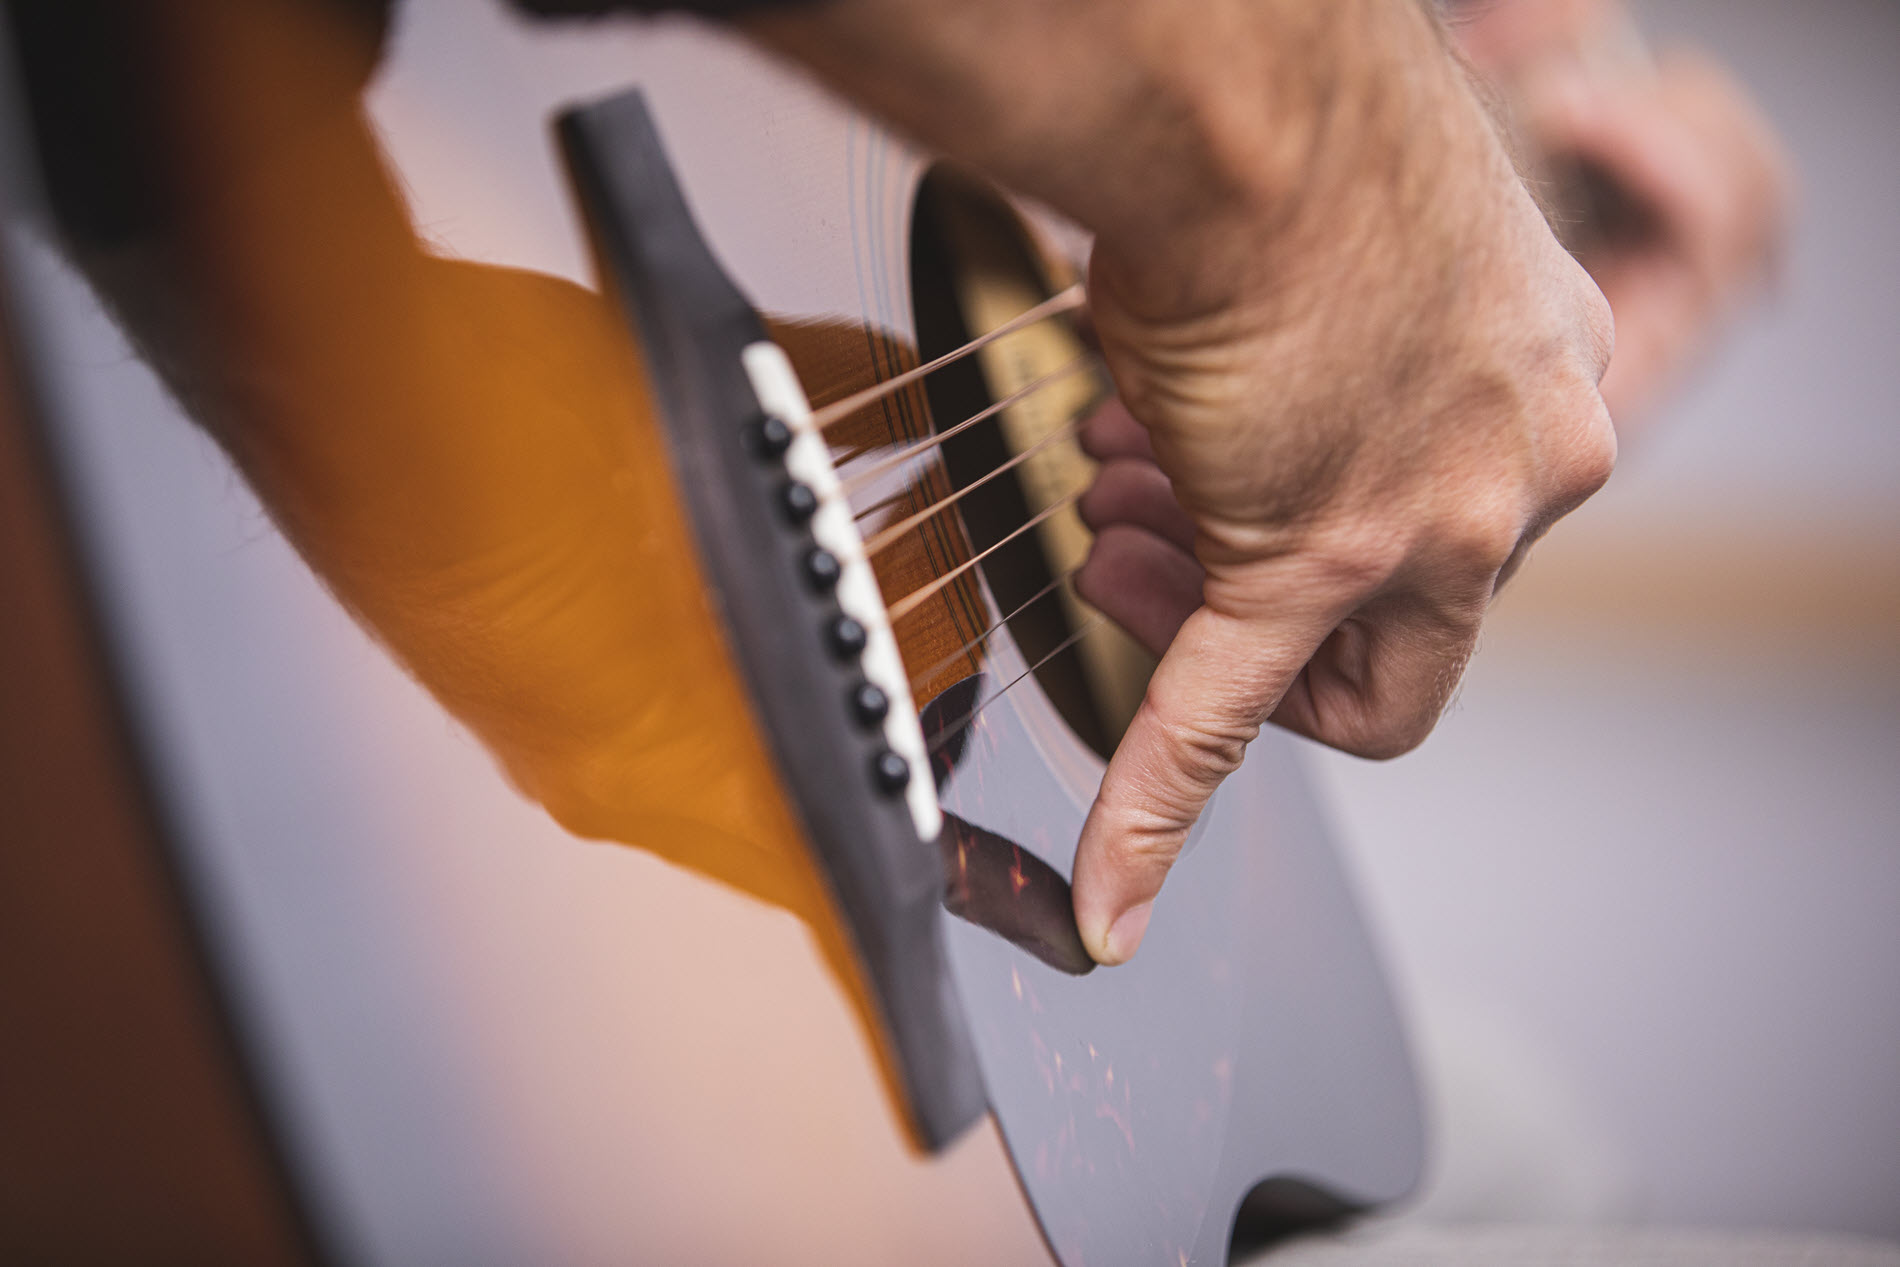 Closeup of someone's hand as they play acoustic guitar.